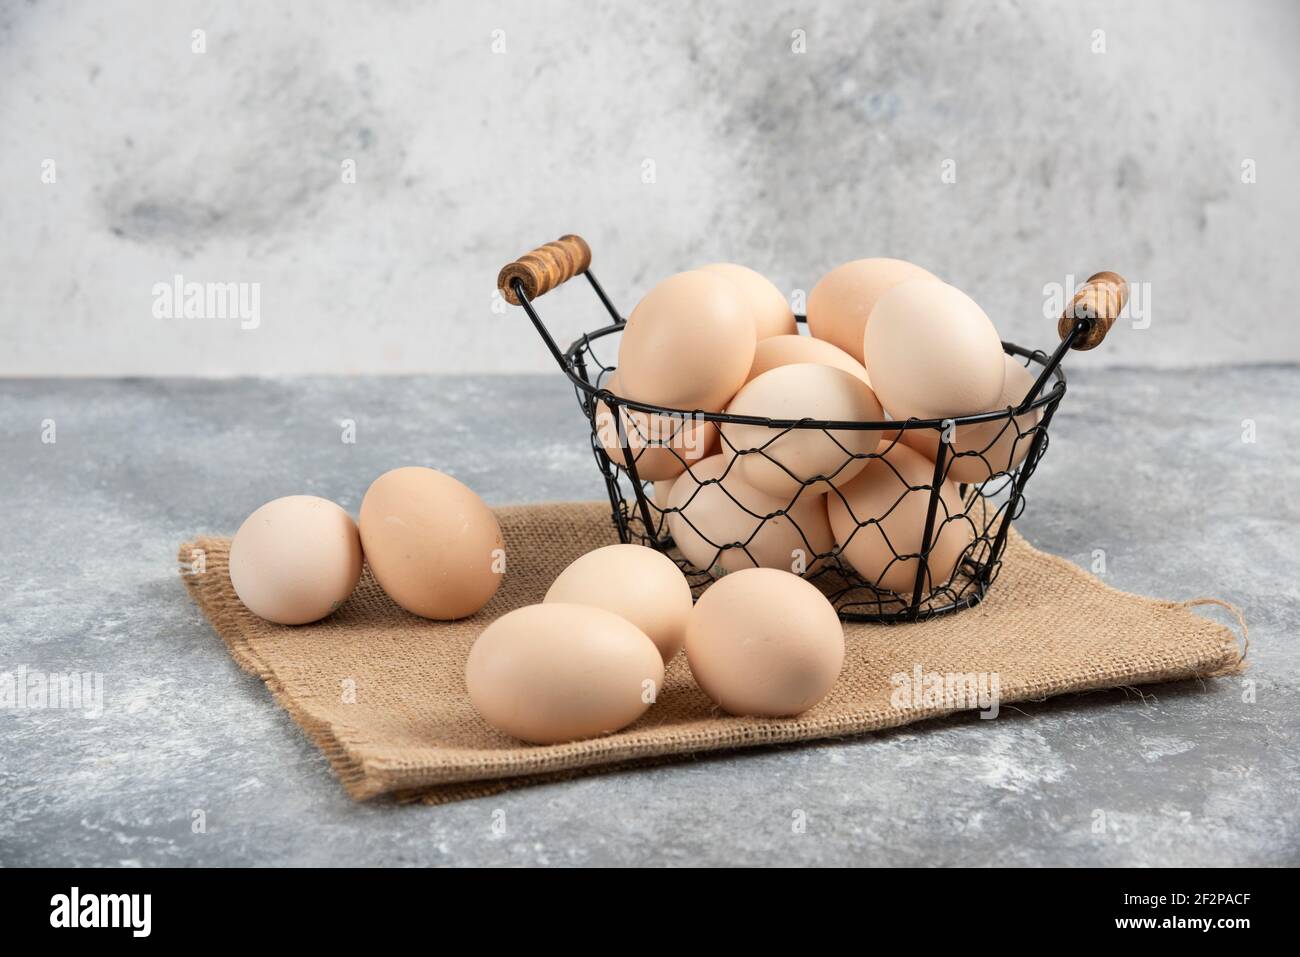 Wicker basket of raw organic eggs on marble background Stock Photo